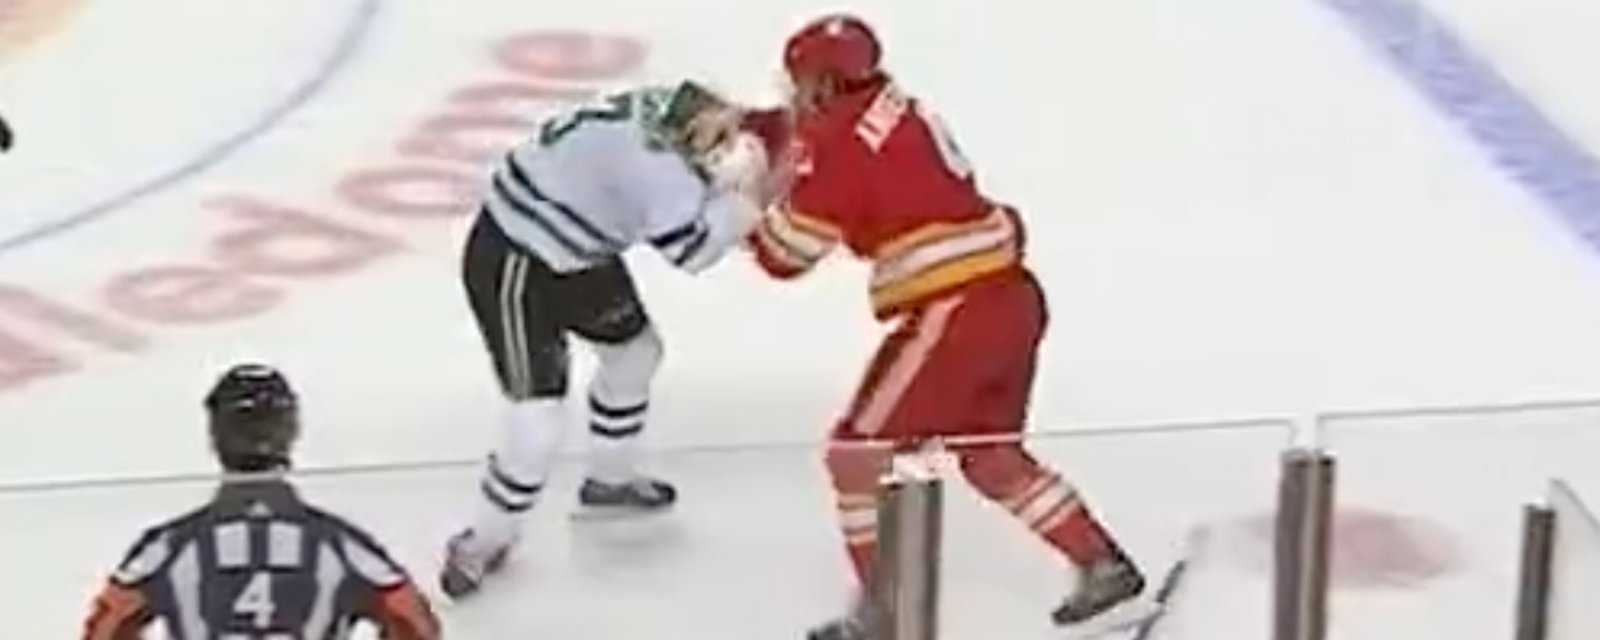 John Klingberg threatens Rasmus Andersson after Game 1 chaotic fight